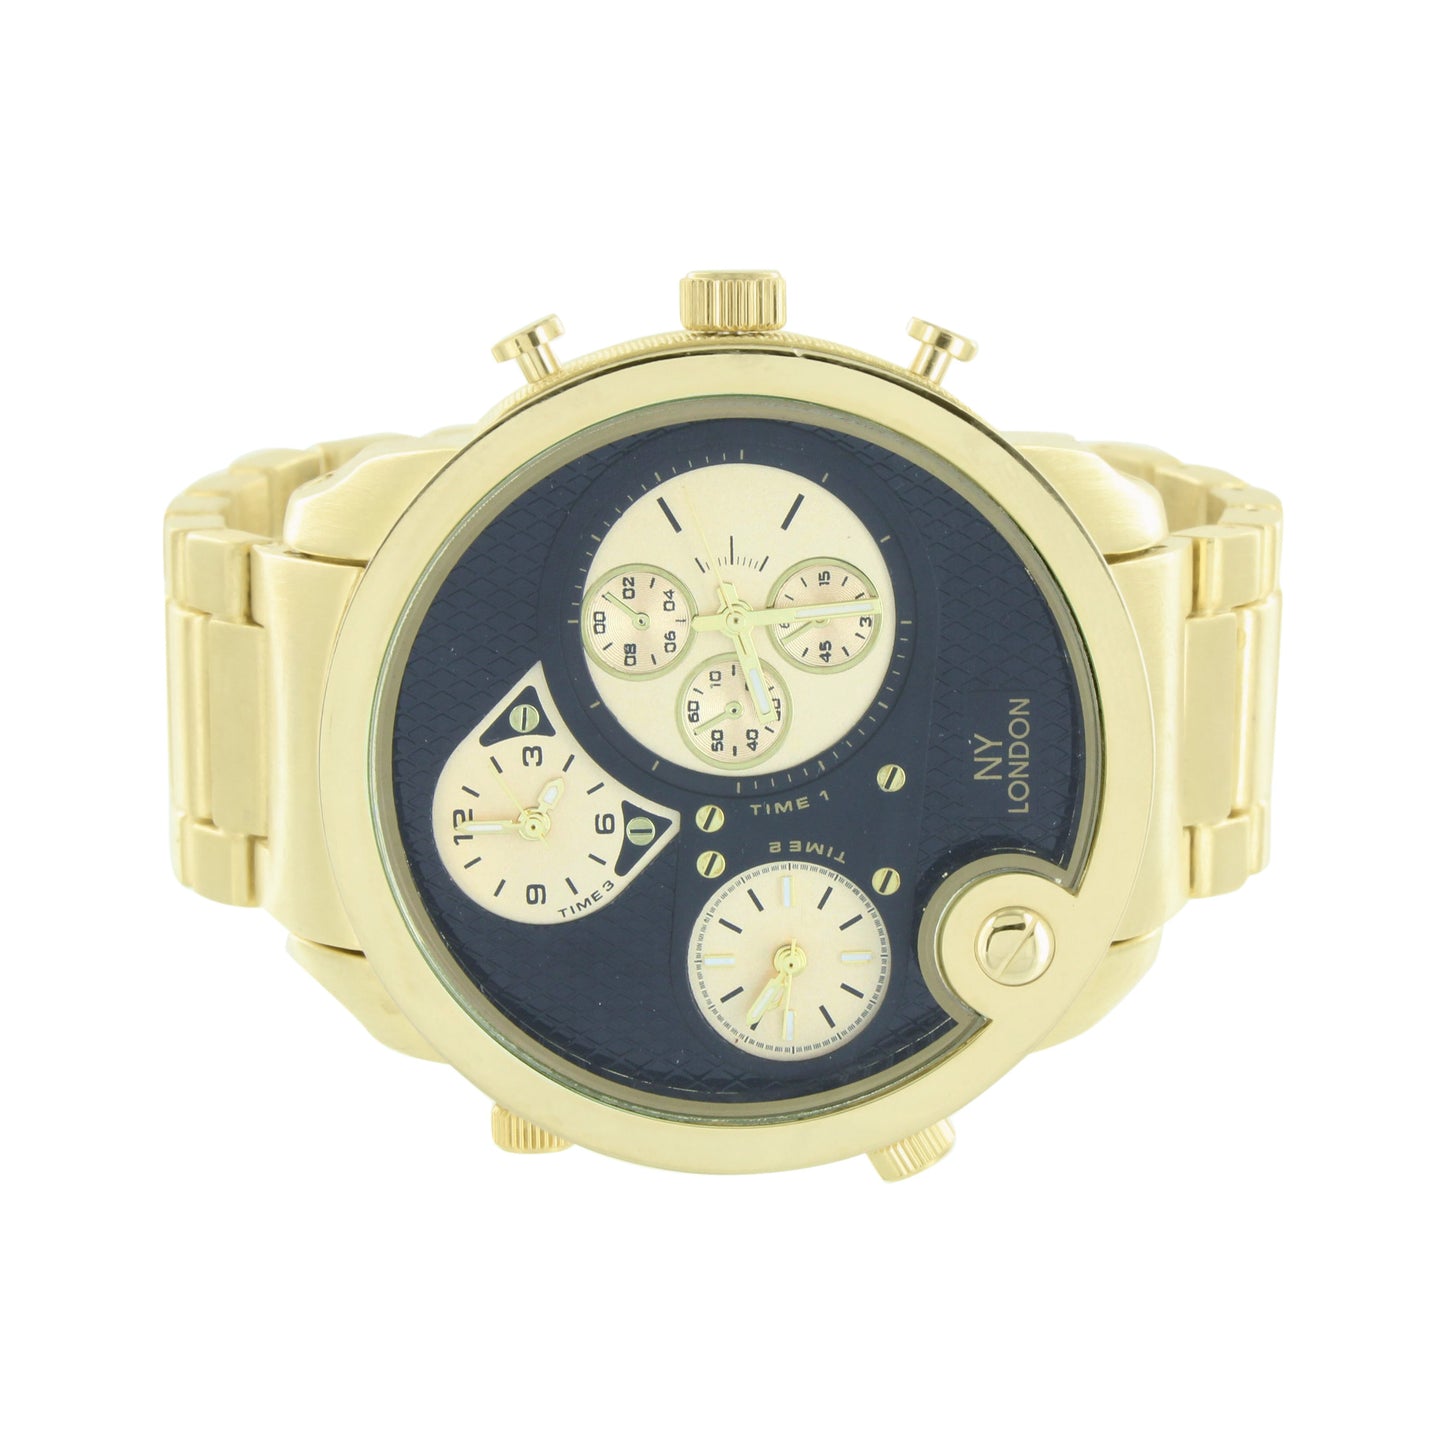 3 Time Zone Watch Yellow Gold Finish With Black Dial Designer Watch